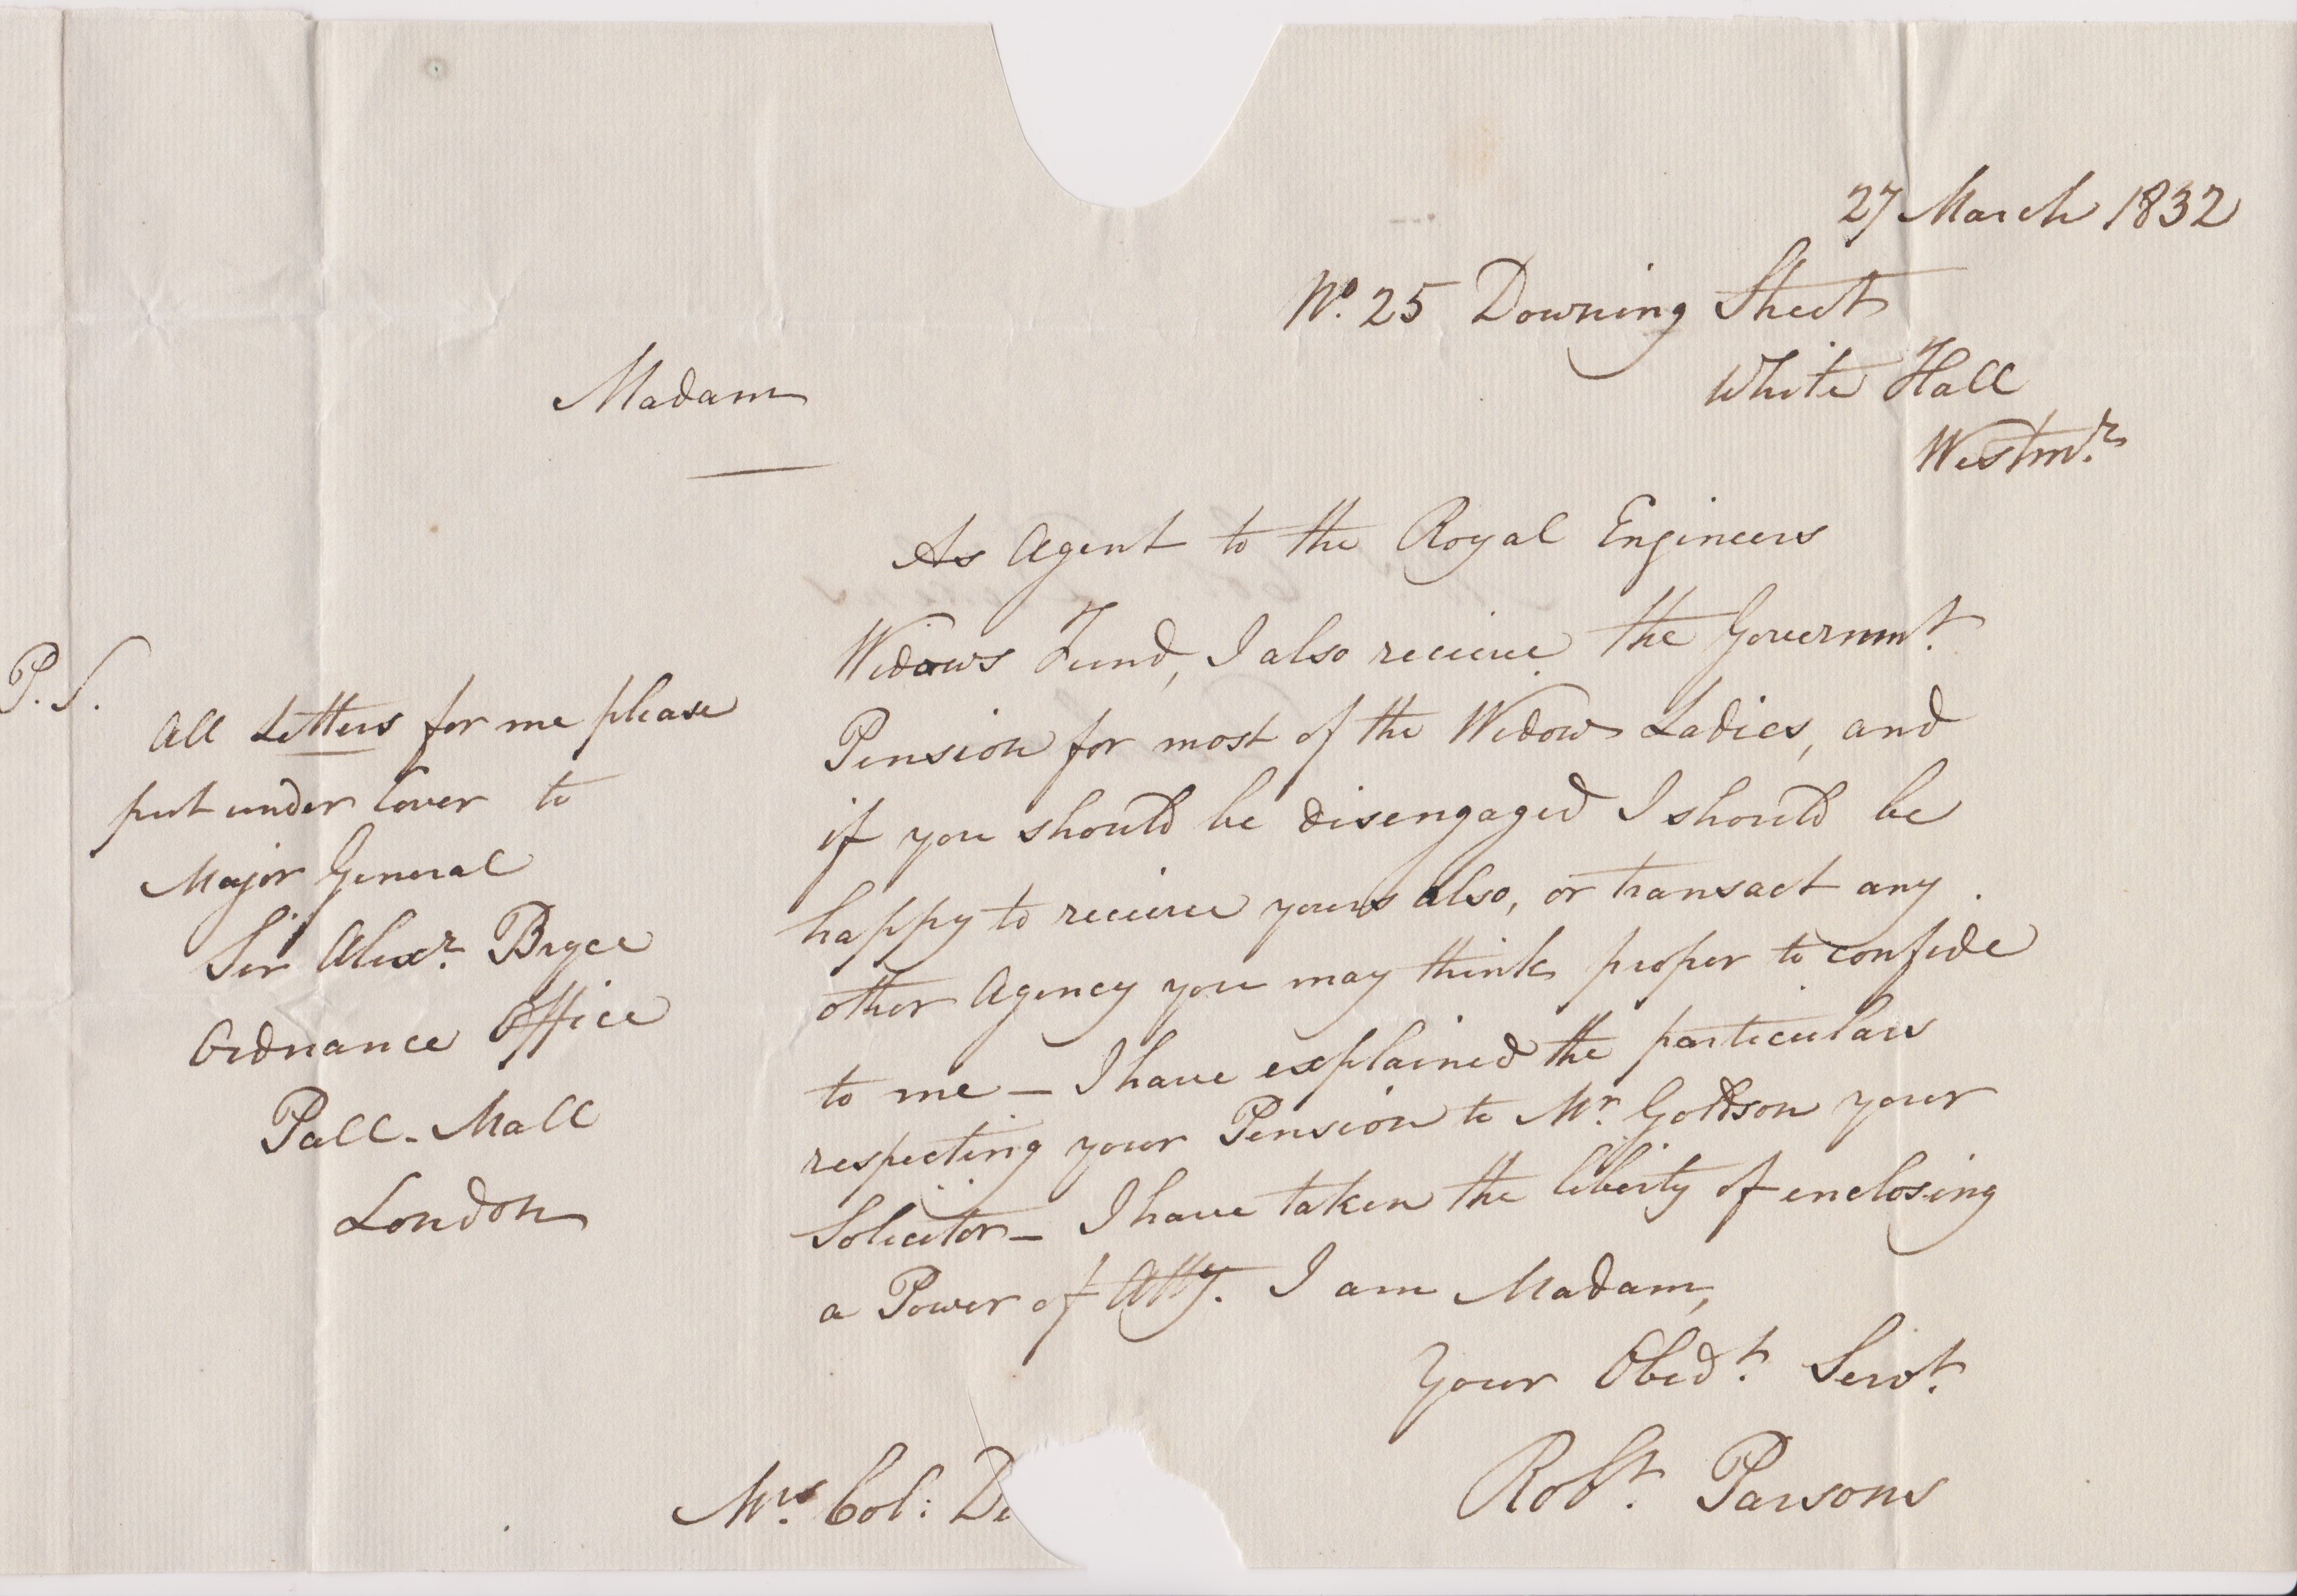 Great Britain 1832-Postal History-Wrapper and letter dated 27th March 1832-25 Downing Street - Image 2 of 2